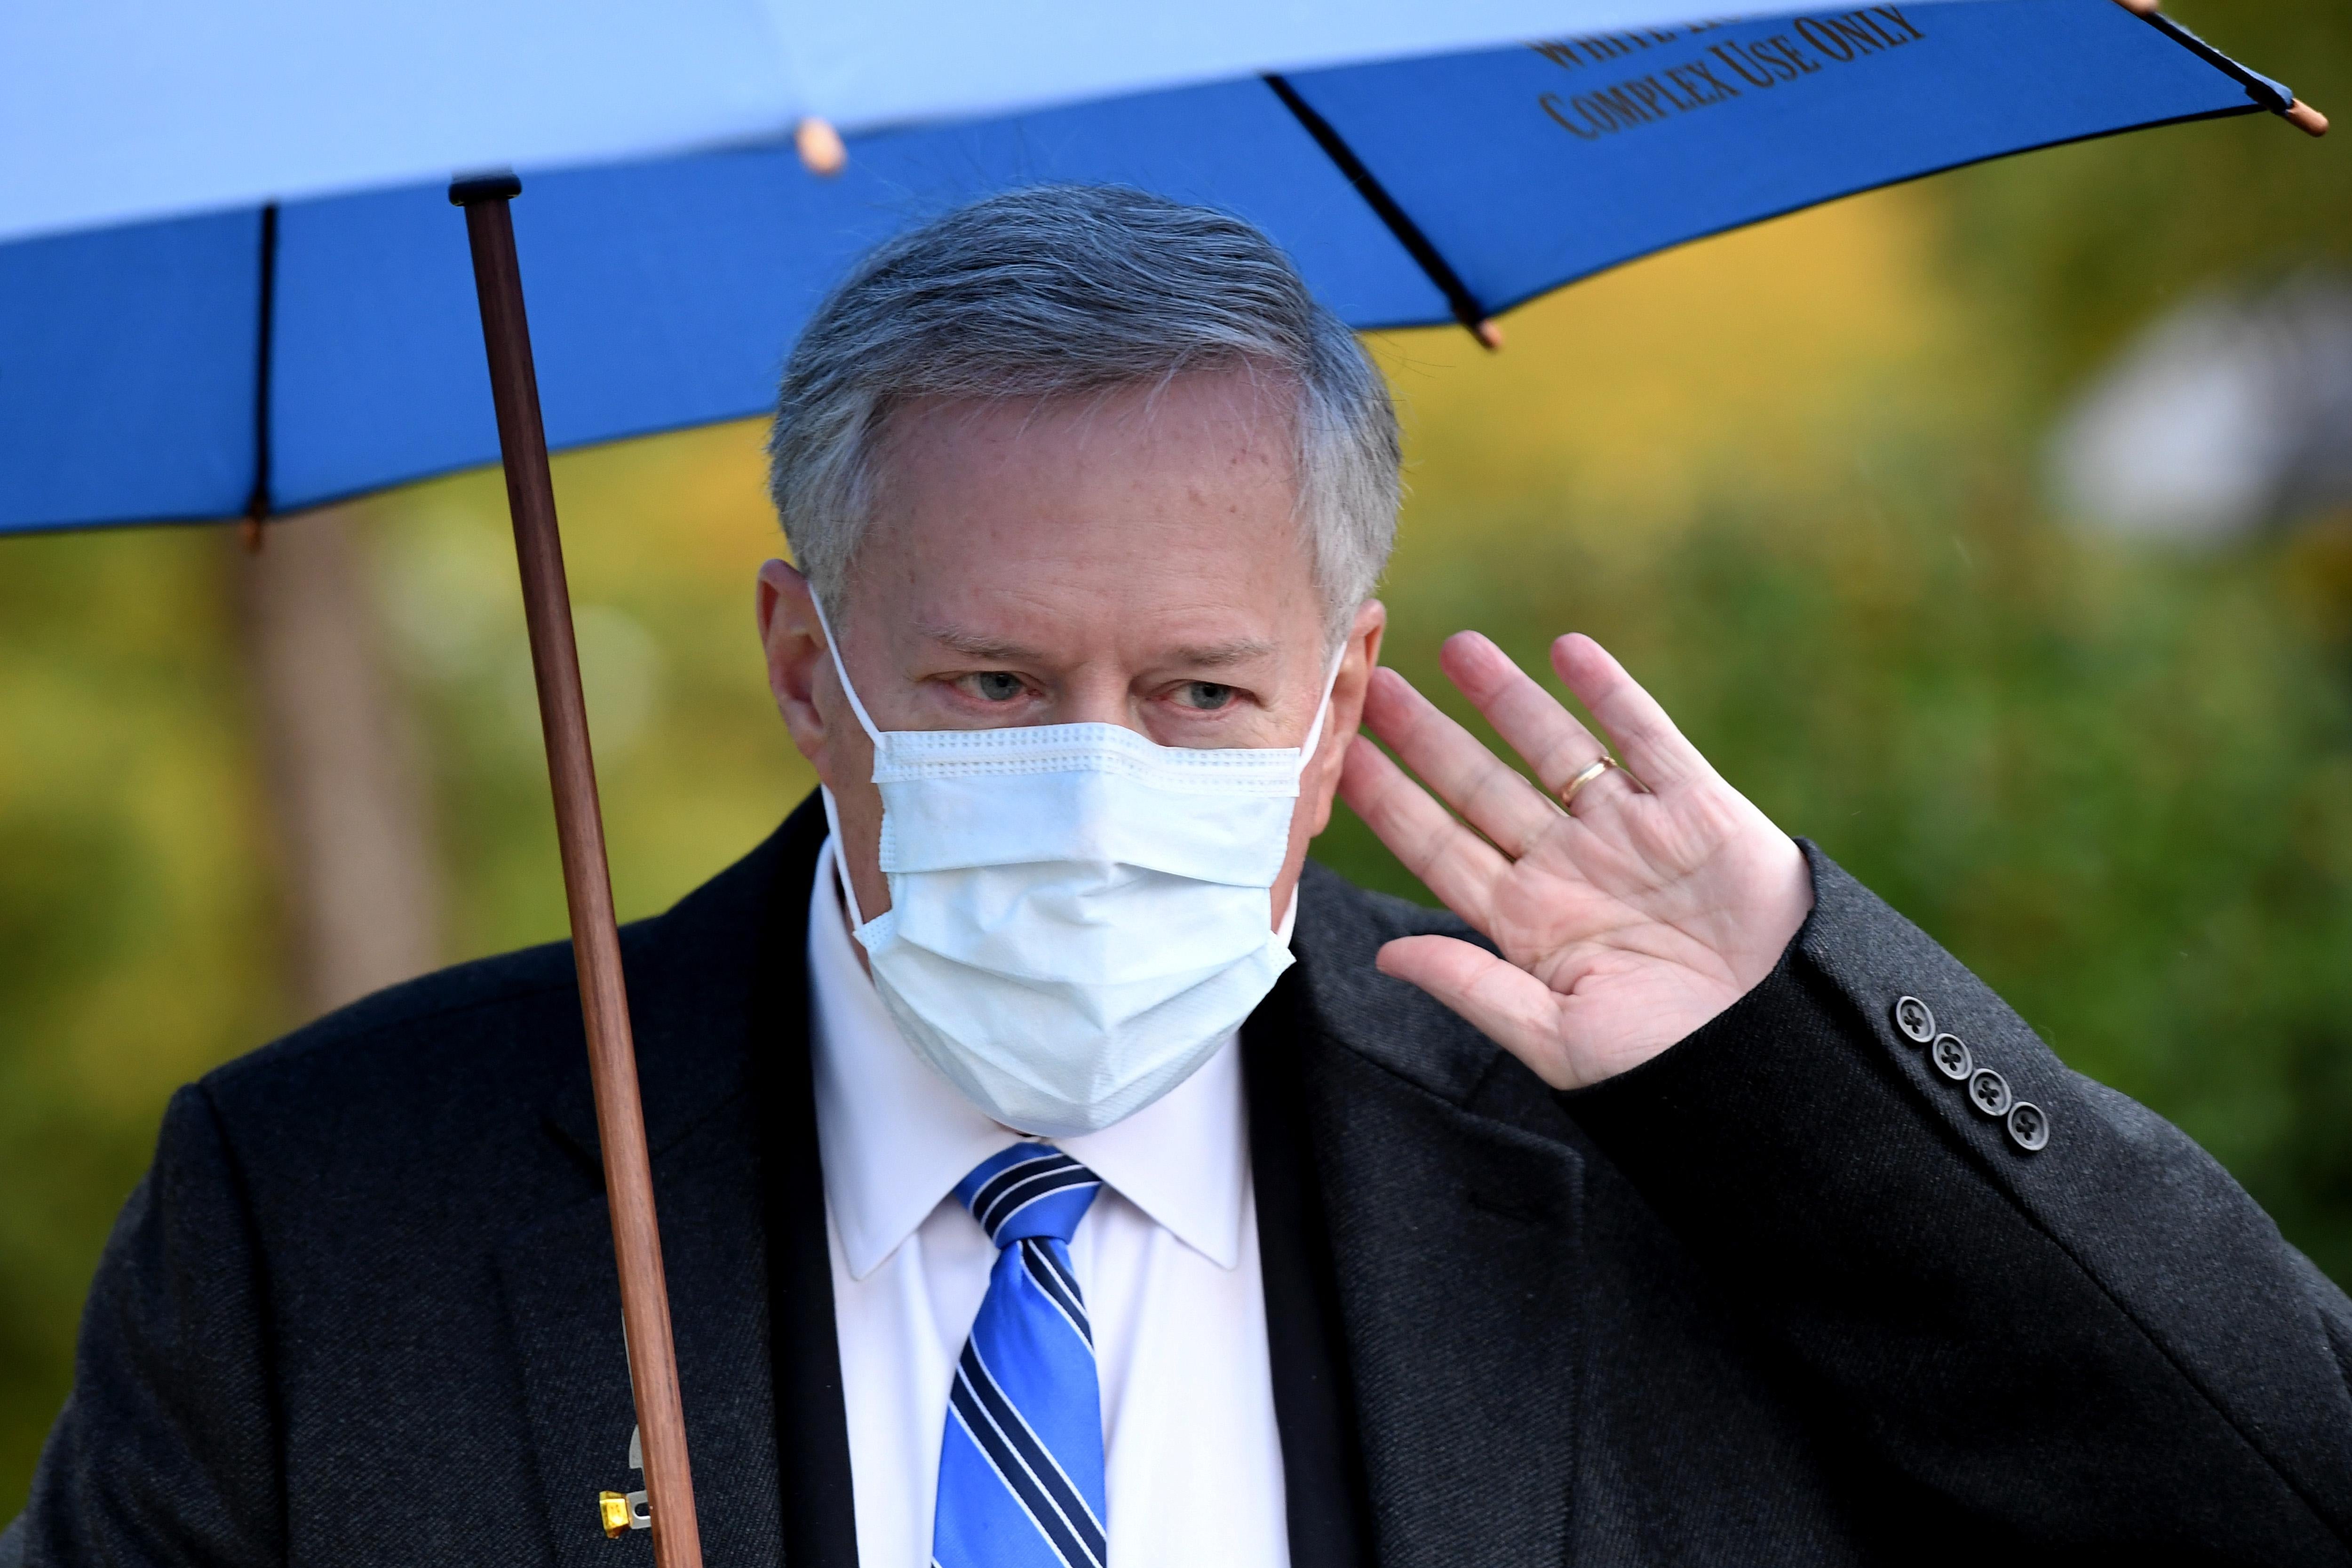 Meadows, standing under an umbrella and wearing a mask, raises his left hand to his left ear